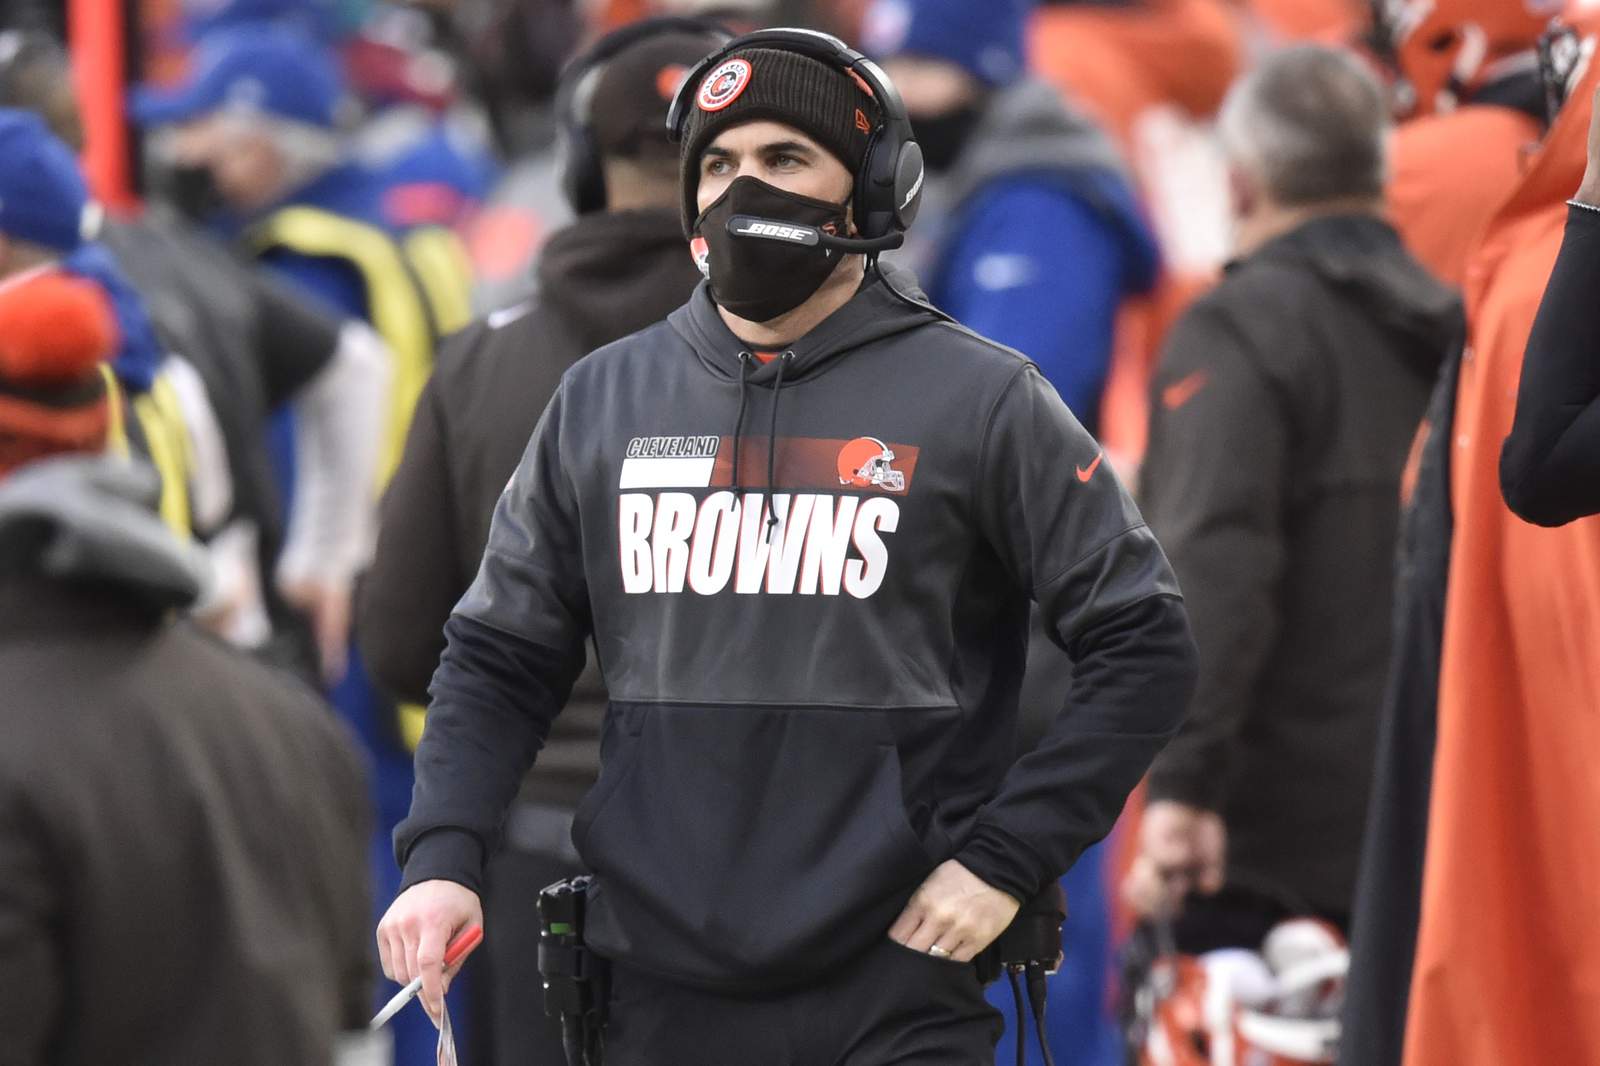 Cruel twist: Browns lose coach for playoffs due to COVID-19